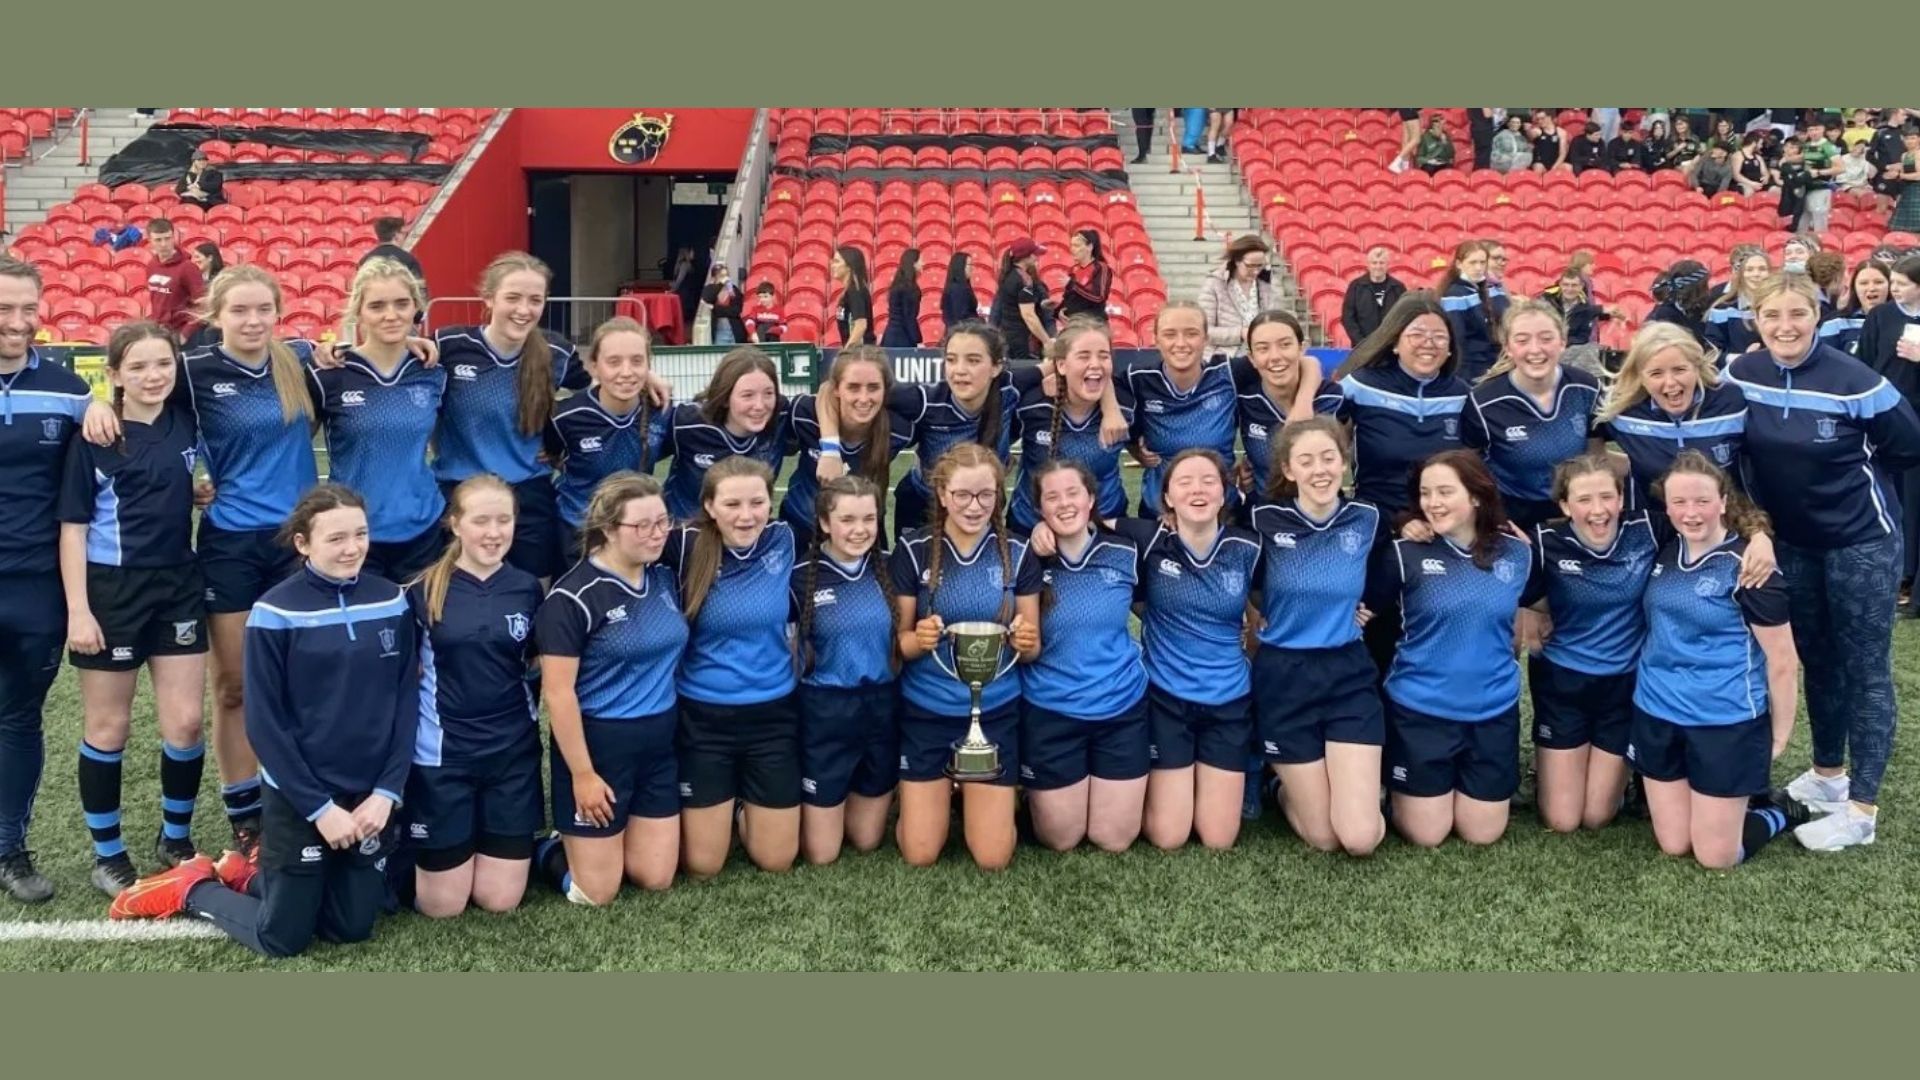 Munster School Girls Junior Cup history was made when Limerick’s Ardscoil Mhuire claimed victory over Killaloe’s St. Annes Community College at the first-ever cup final.